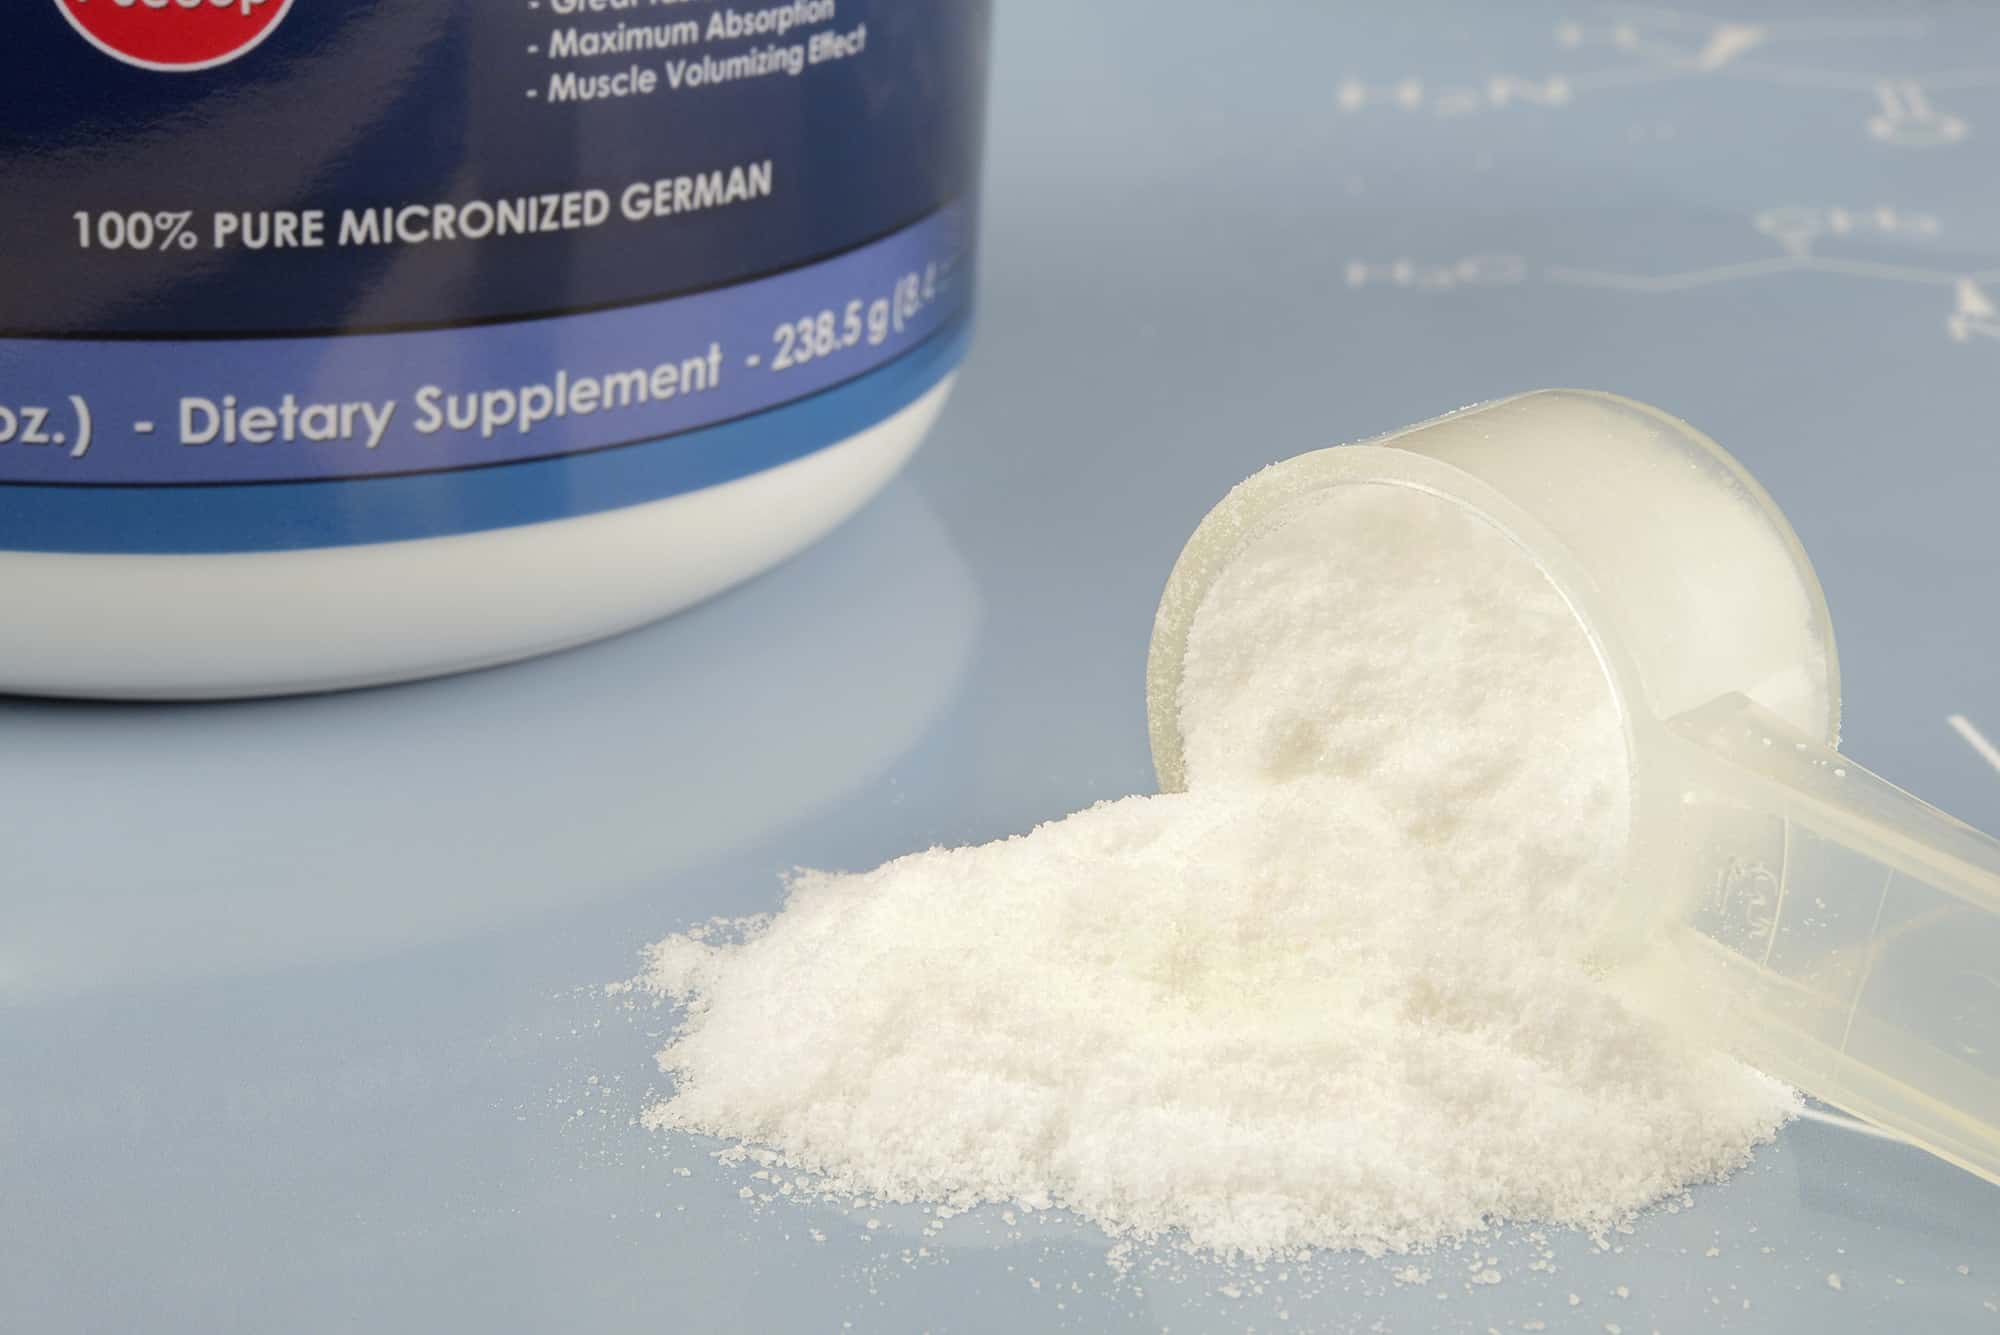 Creatine HCL vs Monohydrate: Which Is Better?